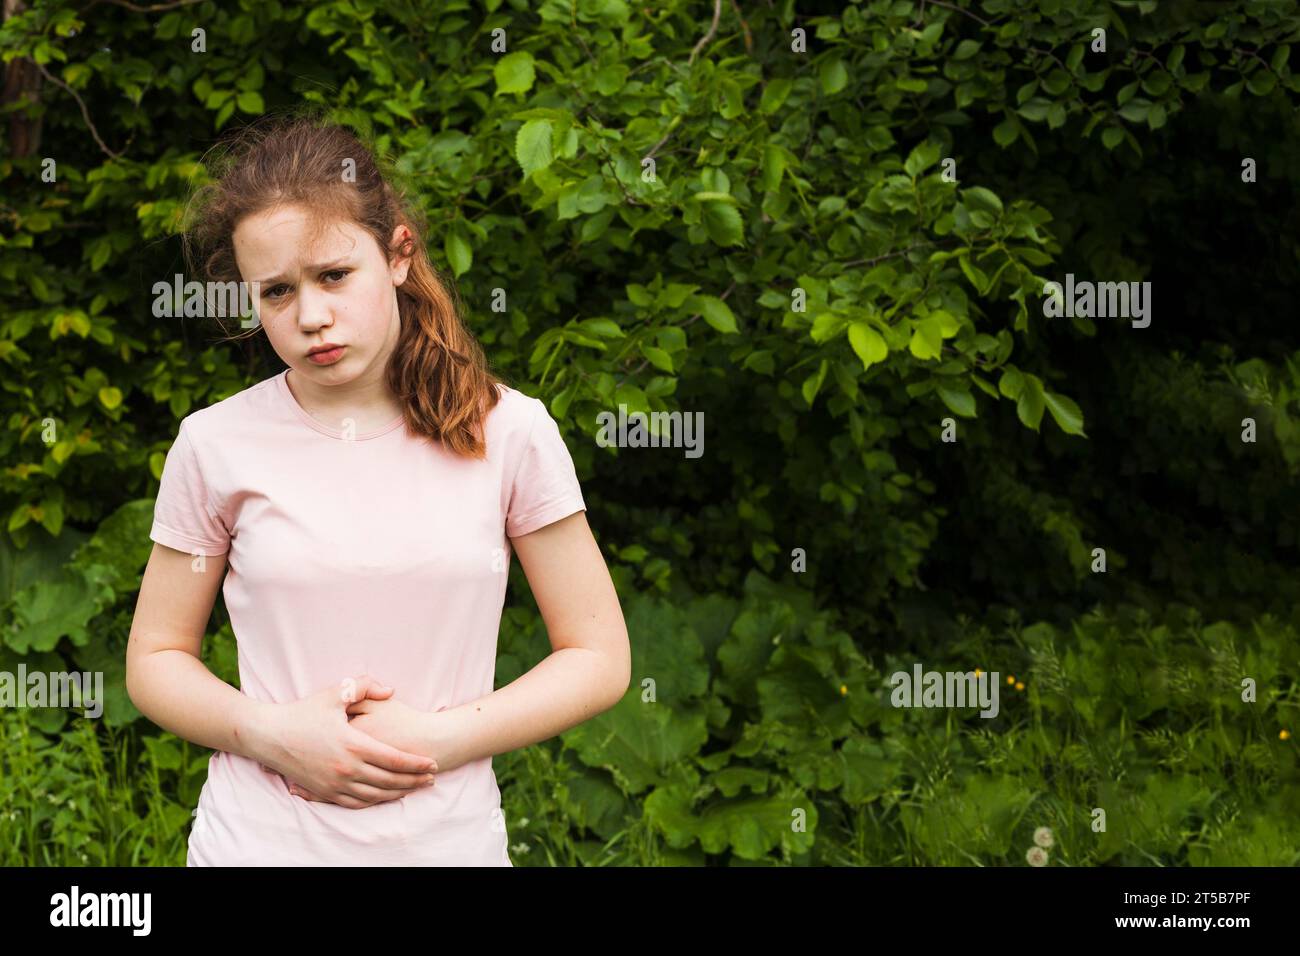 Innocent girl holding her stomach while having stomach pain park Stock Photo